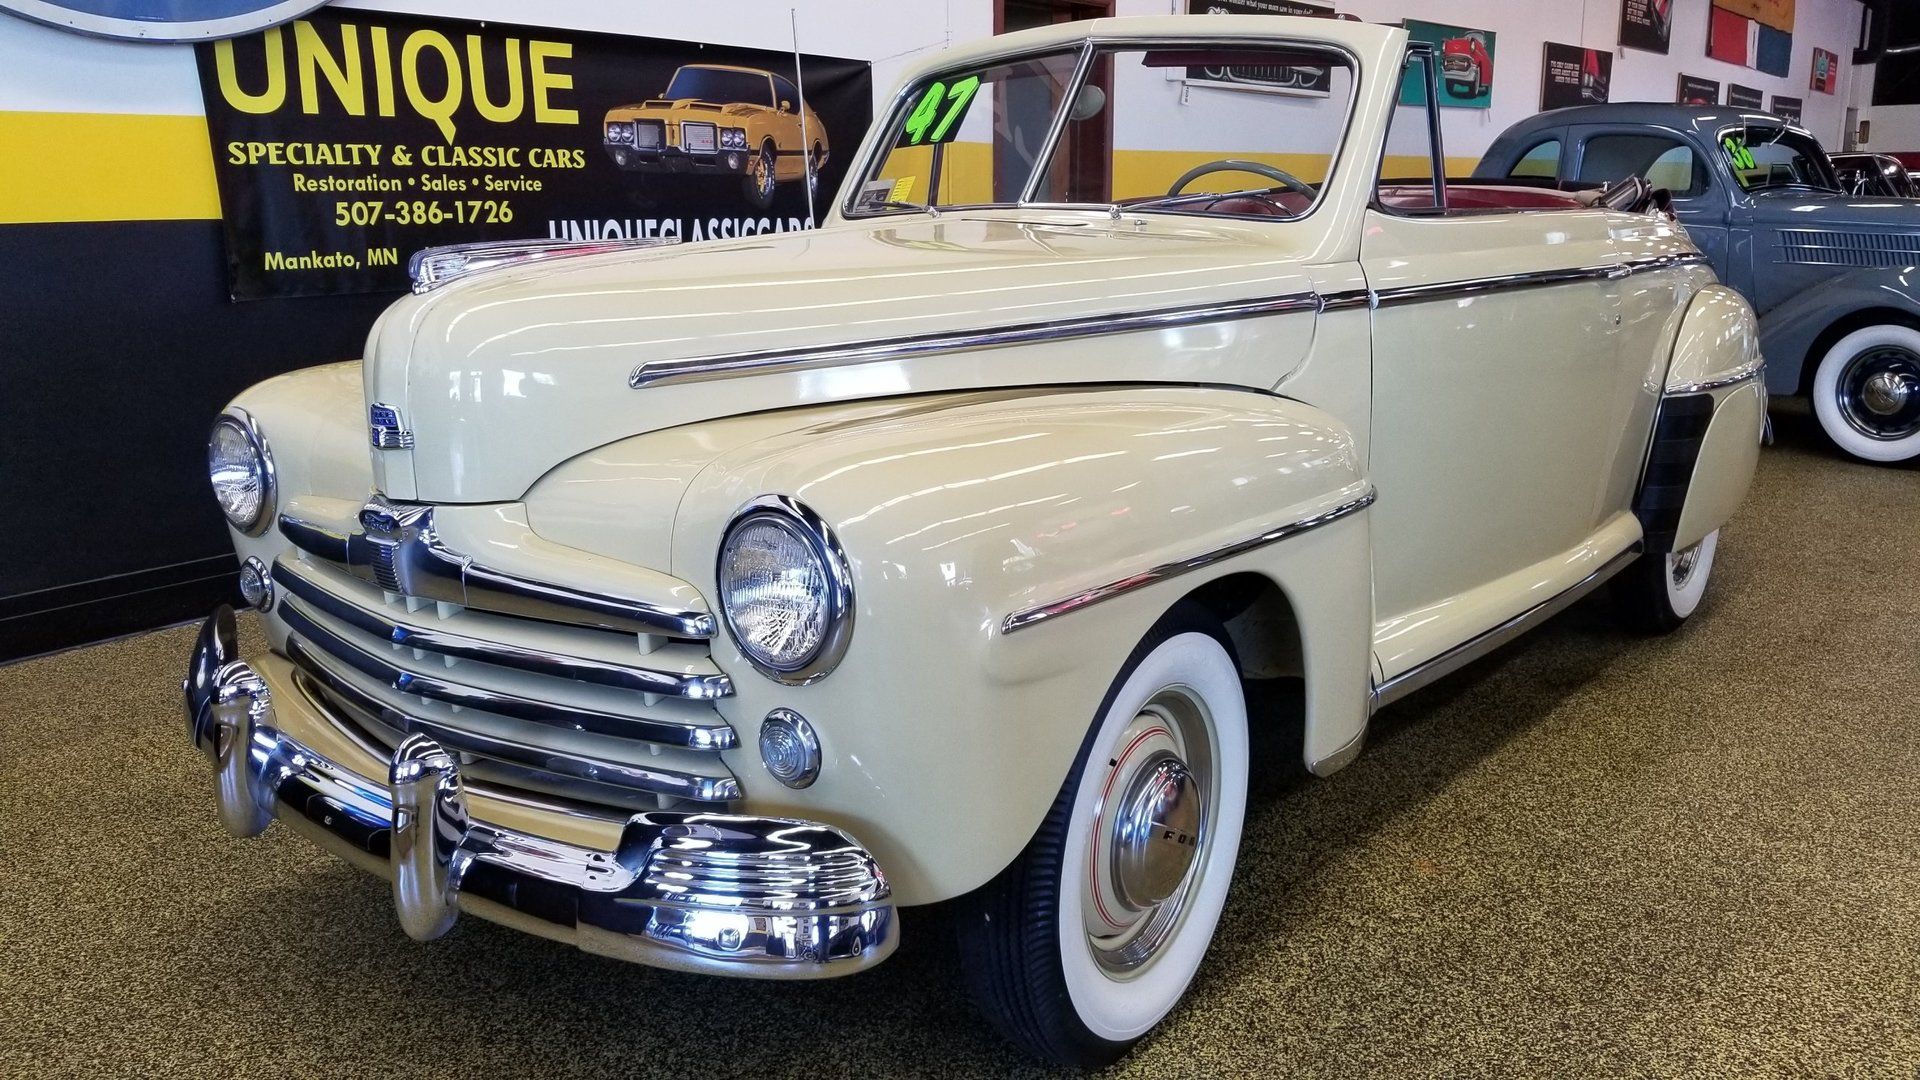 1947 Ford Super Deluxe (The Karate Kid)